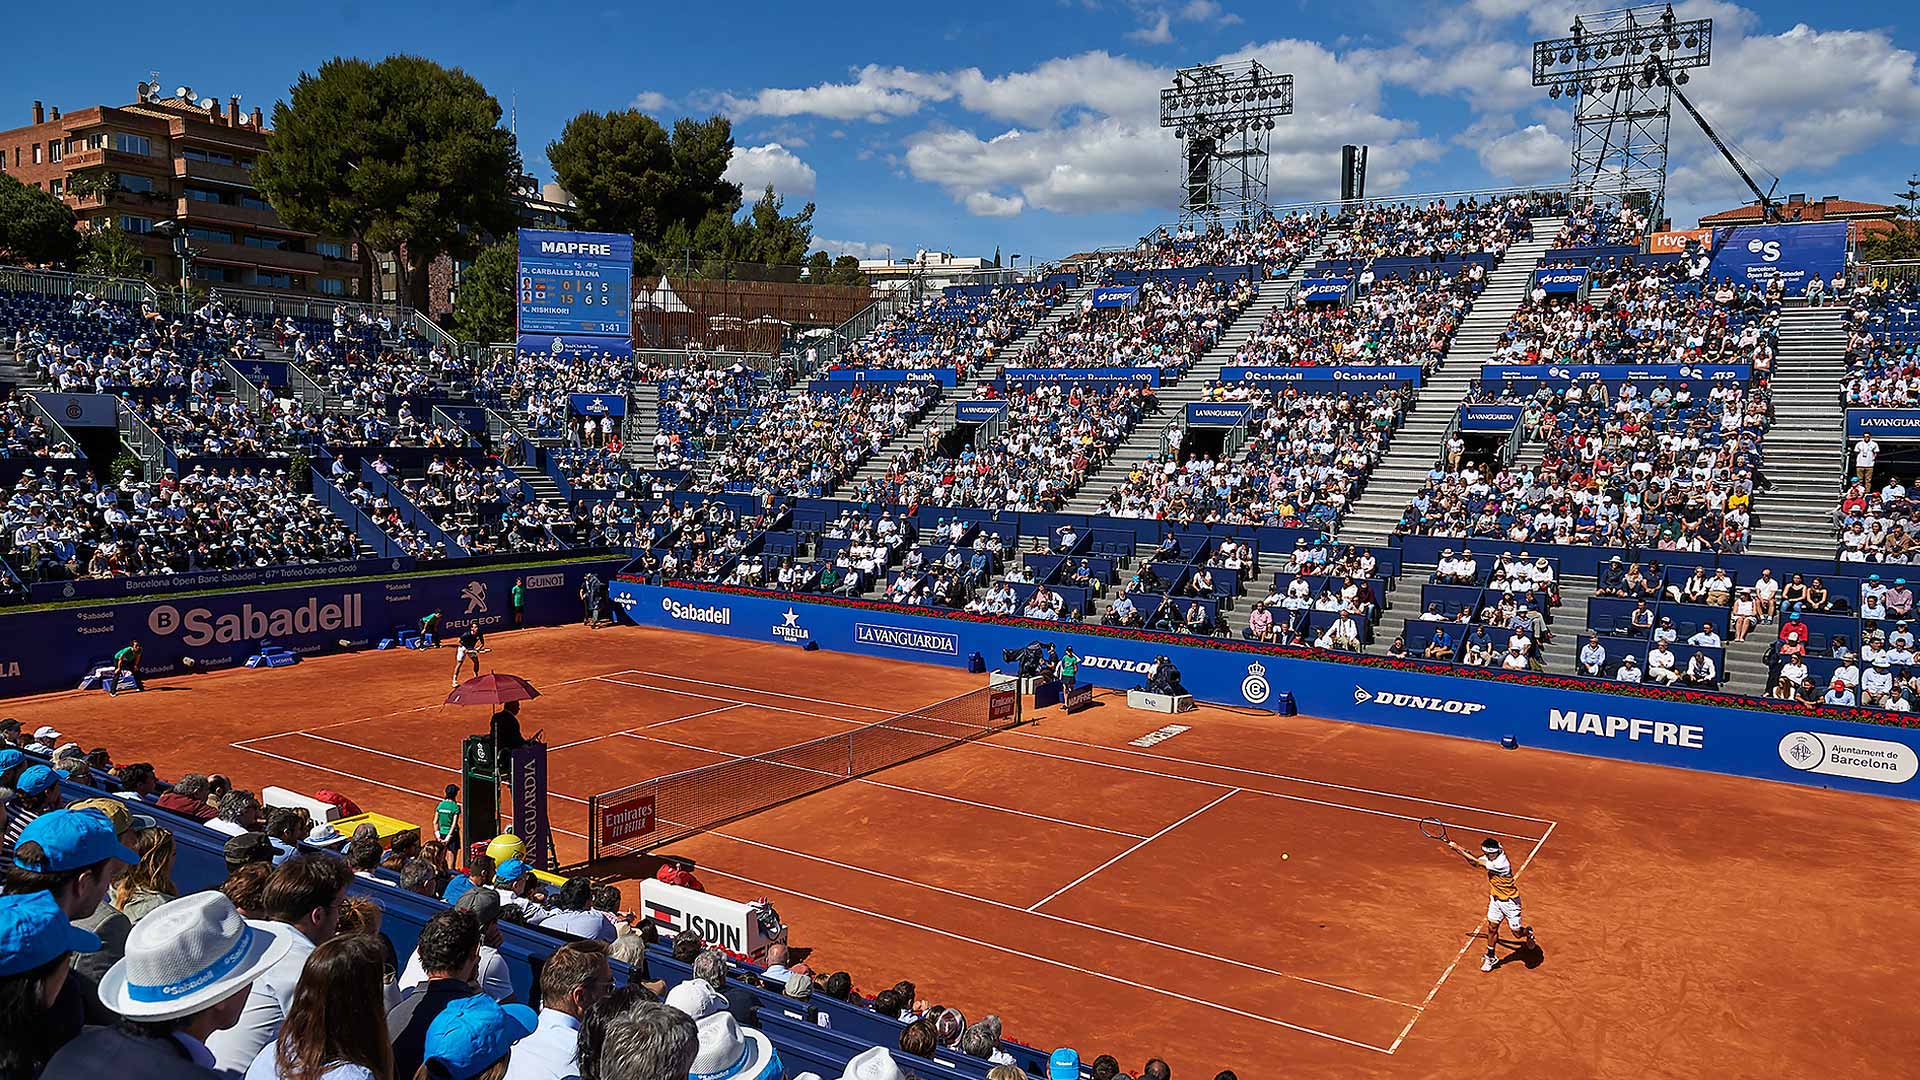 The Barcelona Open Banc Sabadell is an ATP 500 event in Spain.